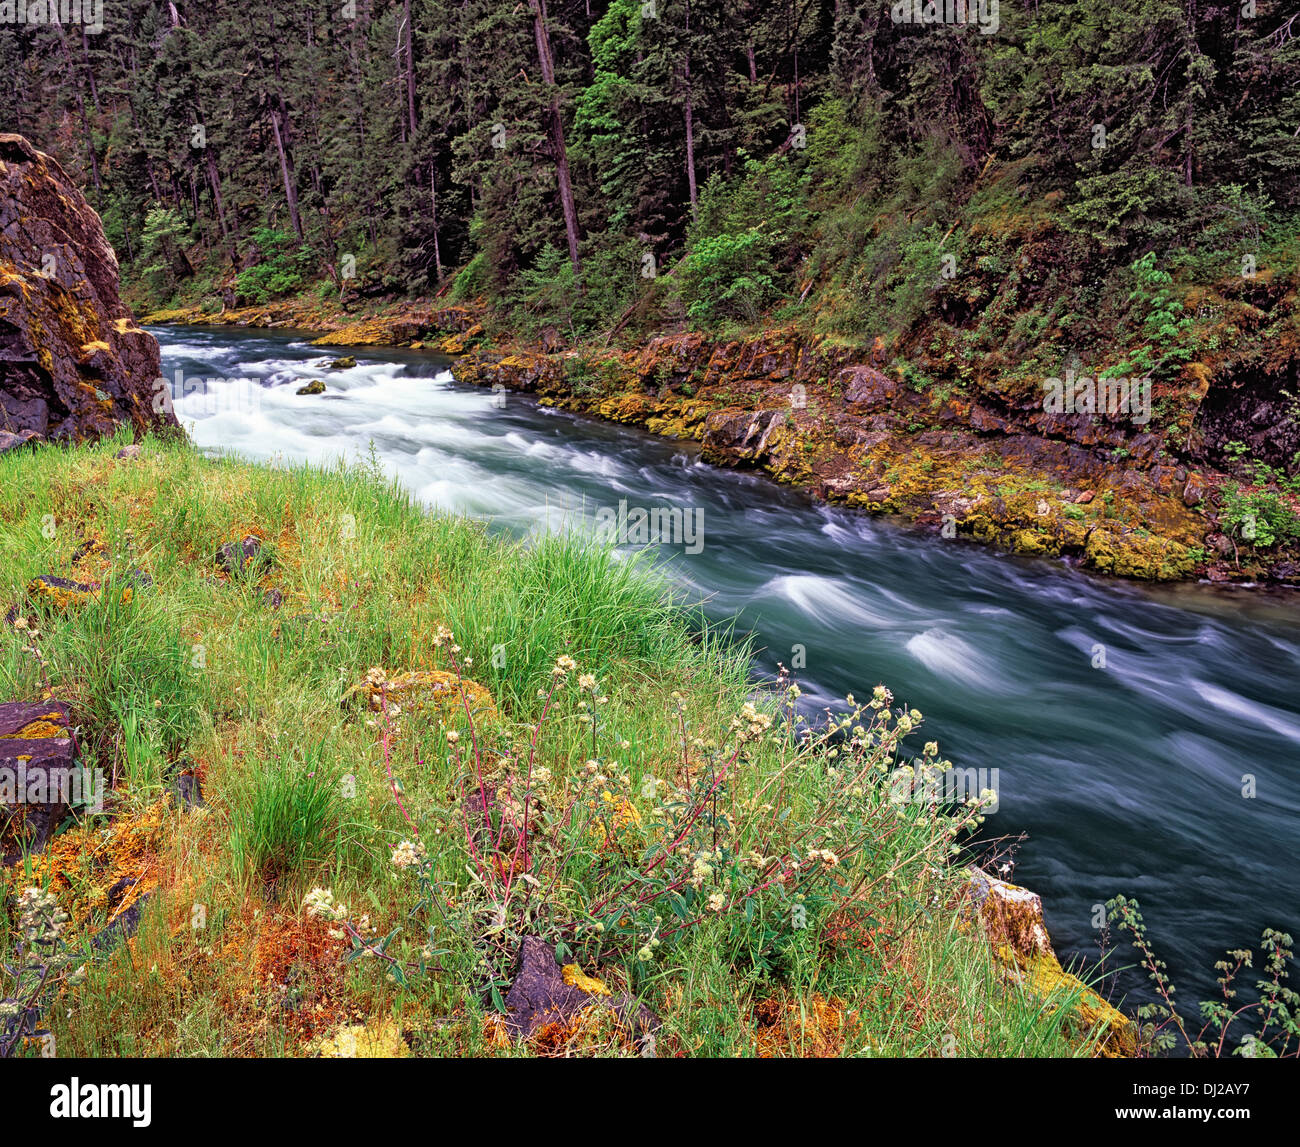 The Wild and Scenic North Umpqua River rushes past the spring greenery in southern Oregon's Douglas County. Stock Photo